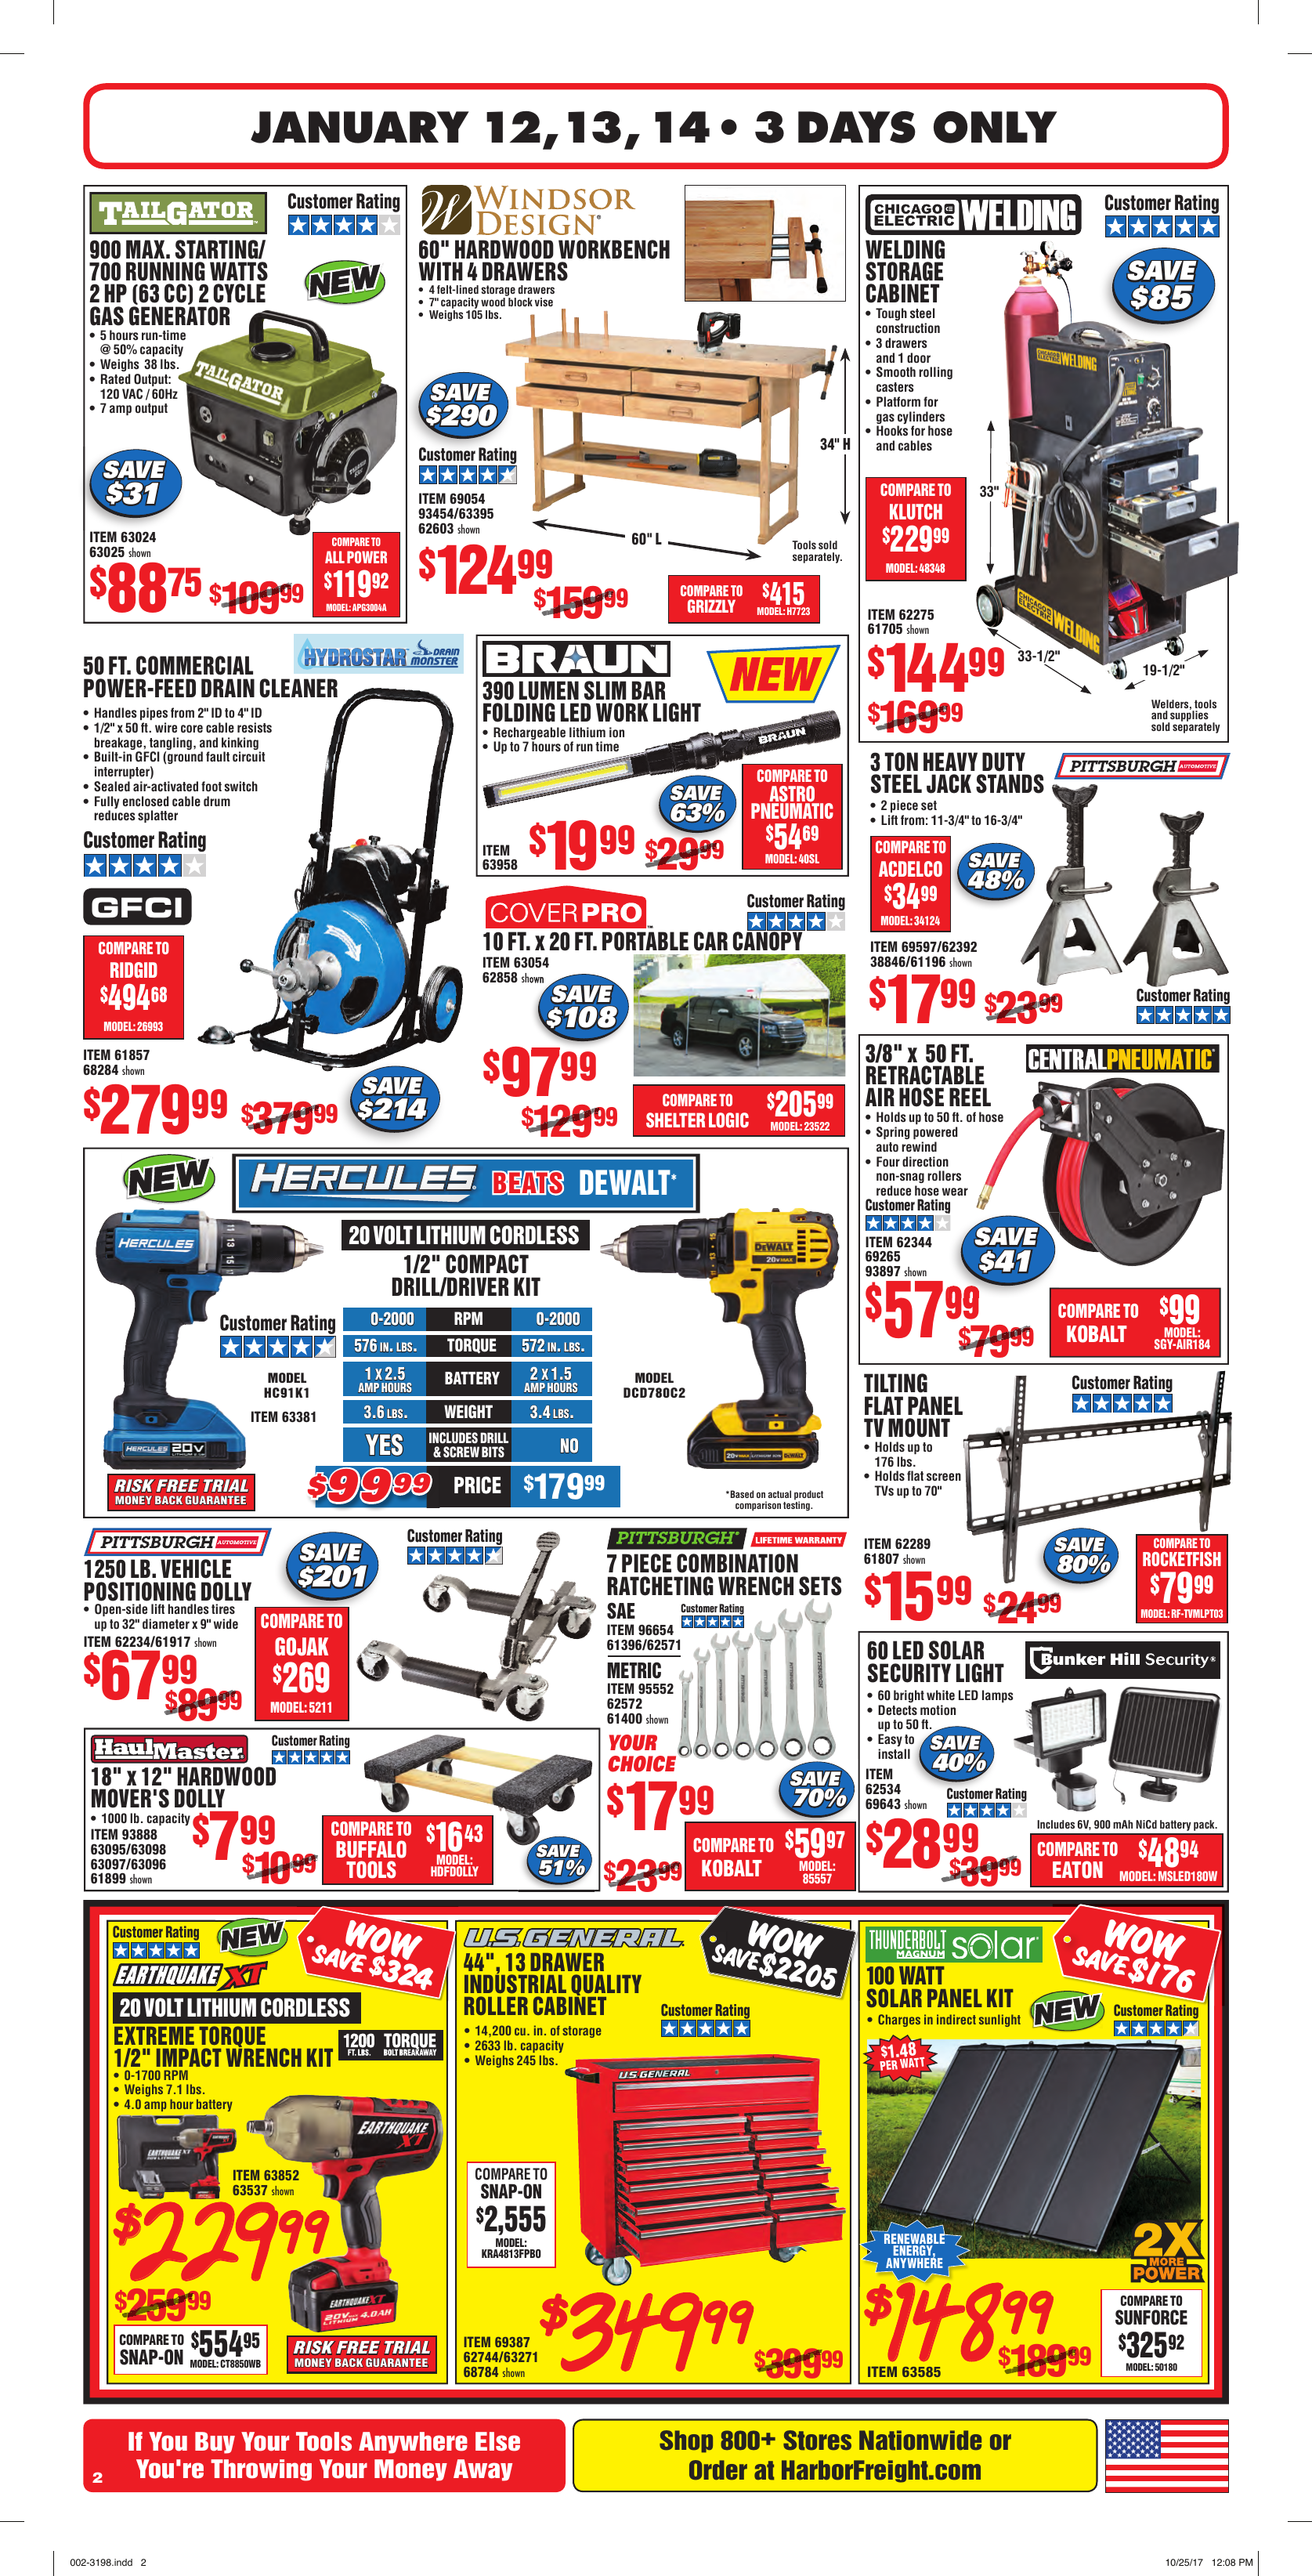 Page 2 of 4 - 001-3198 Jan-Blowout-Sale